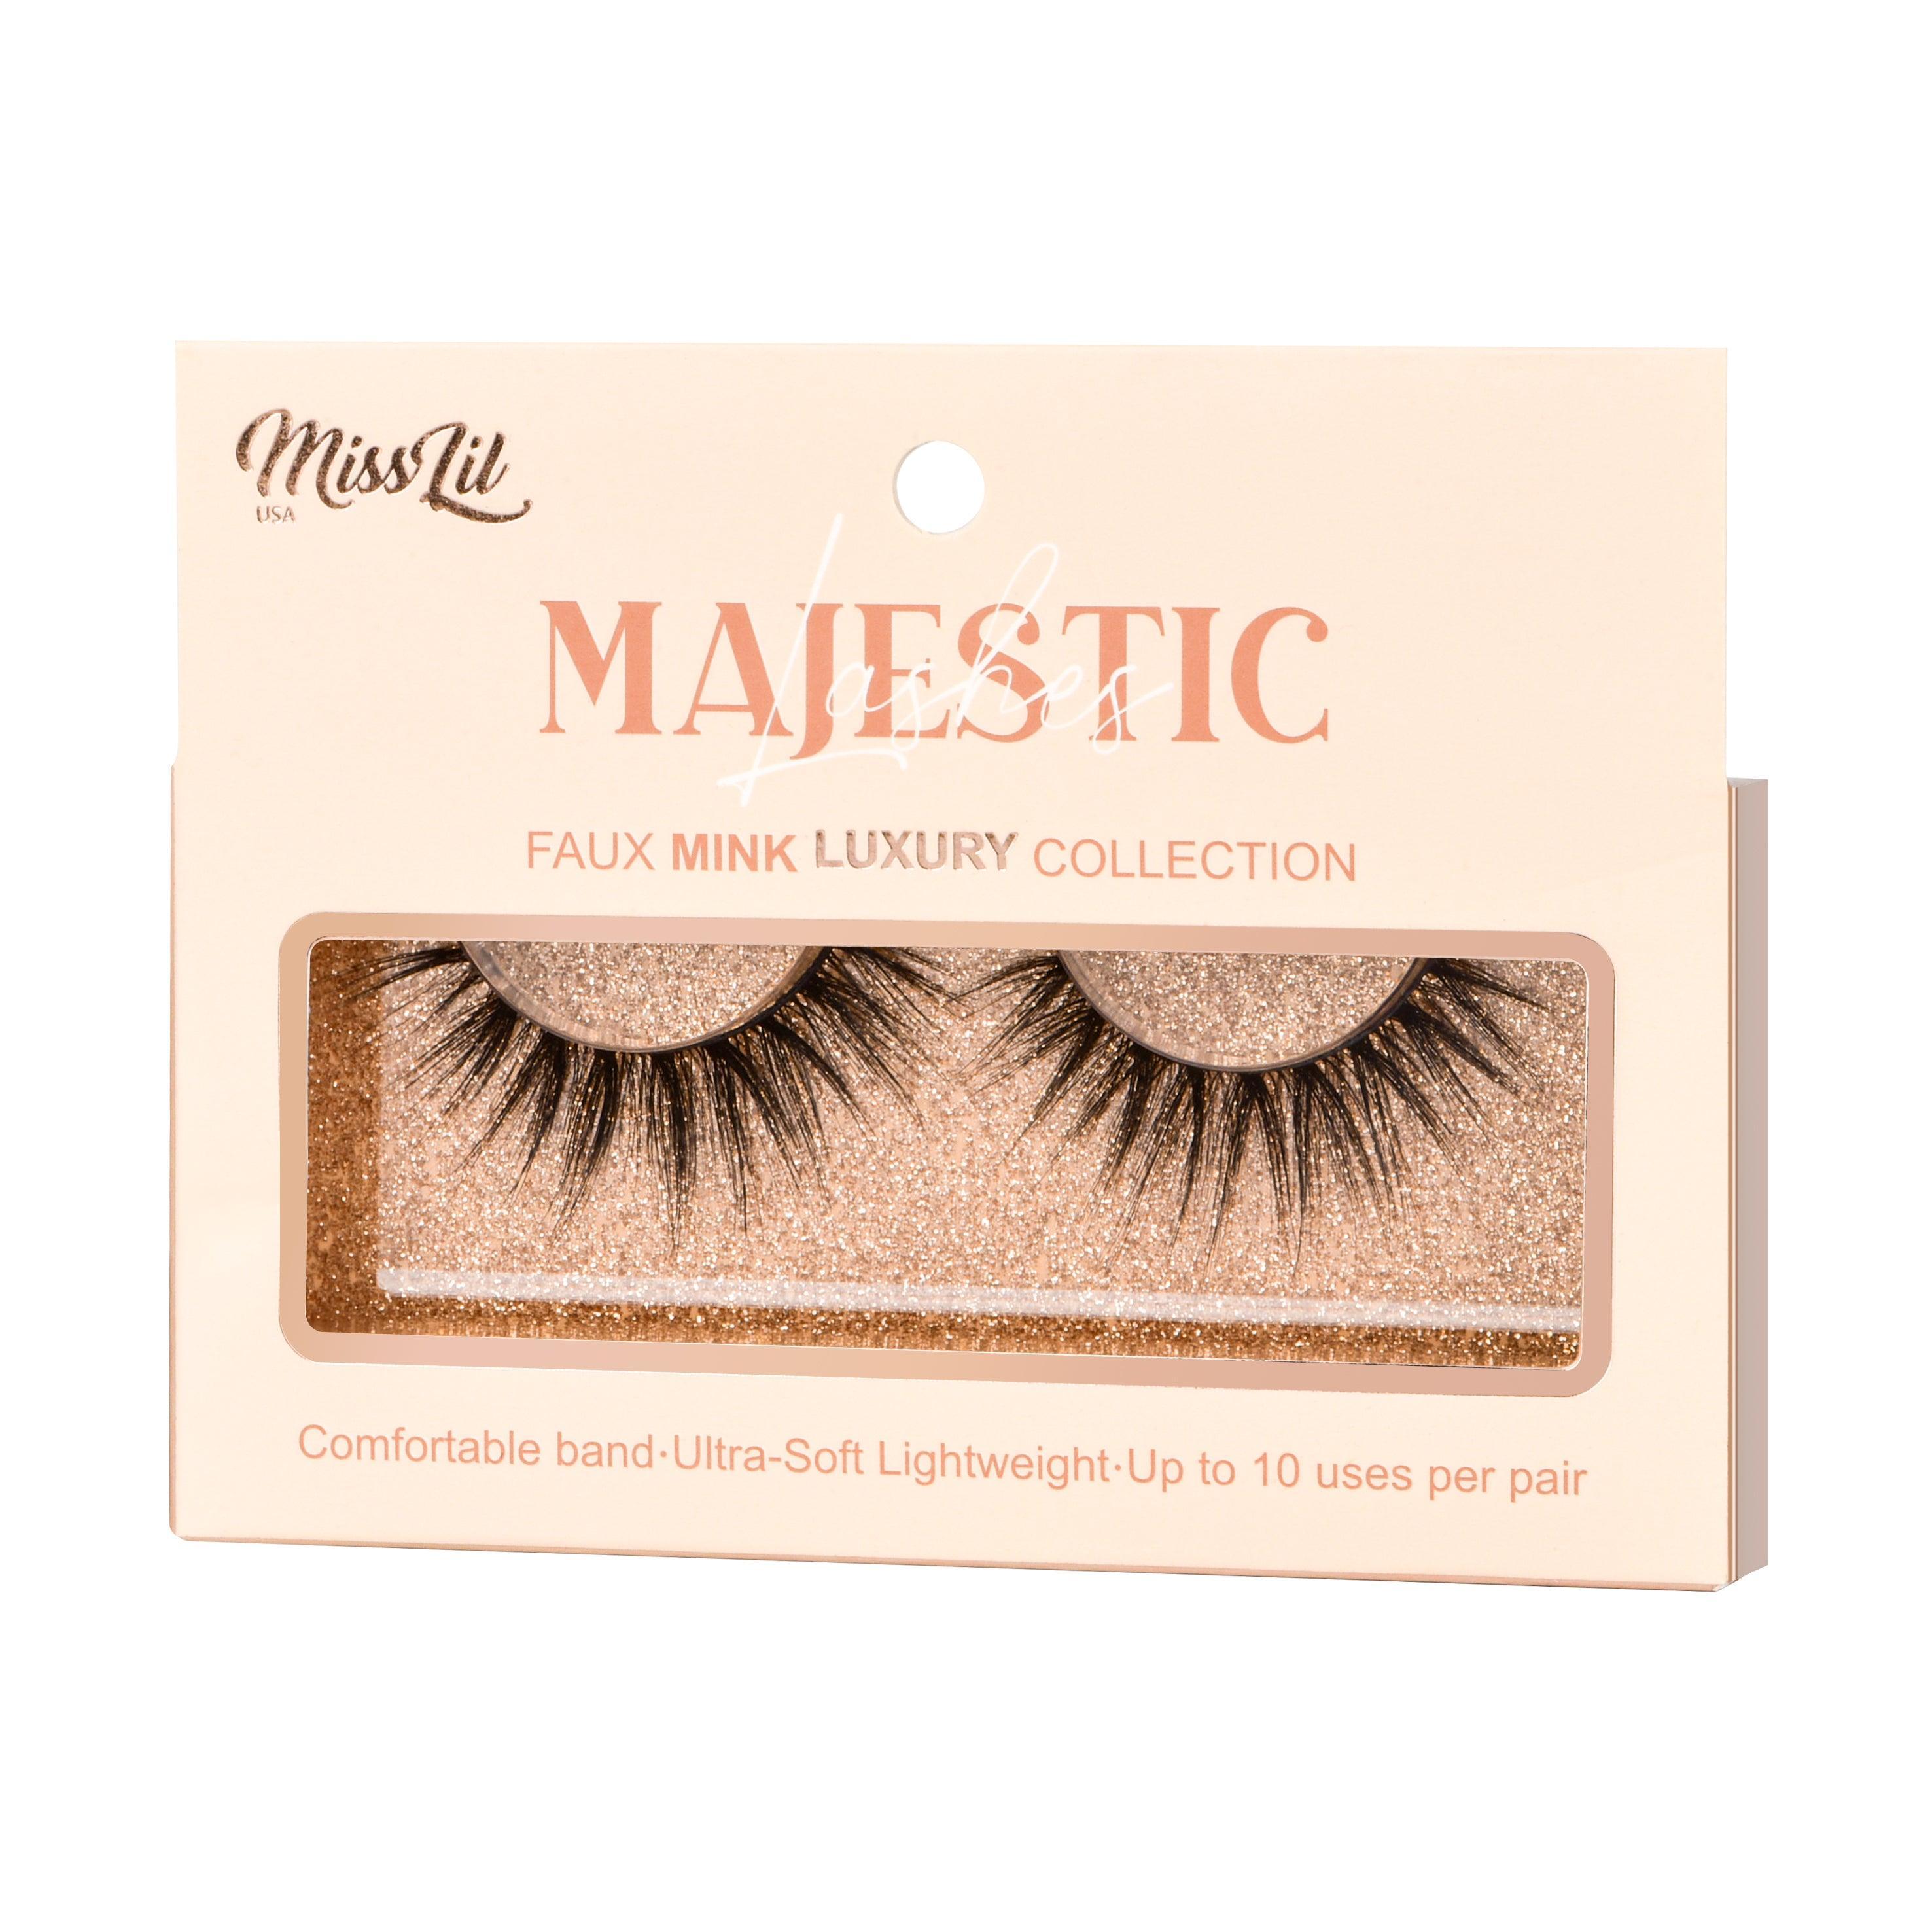 Majestic Collection 23 fake lashes - Miss Lil USA Wholesale